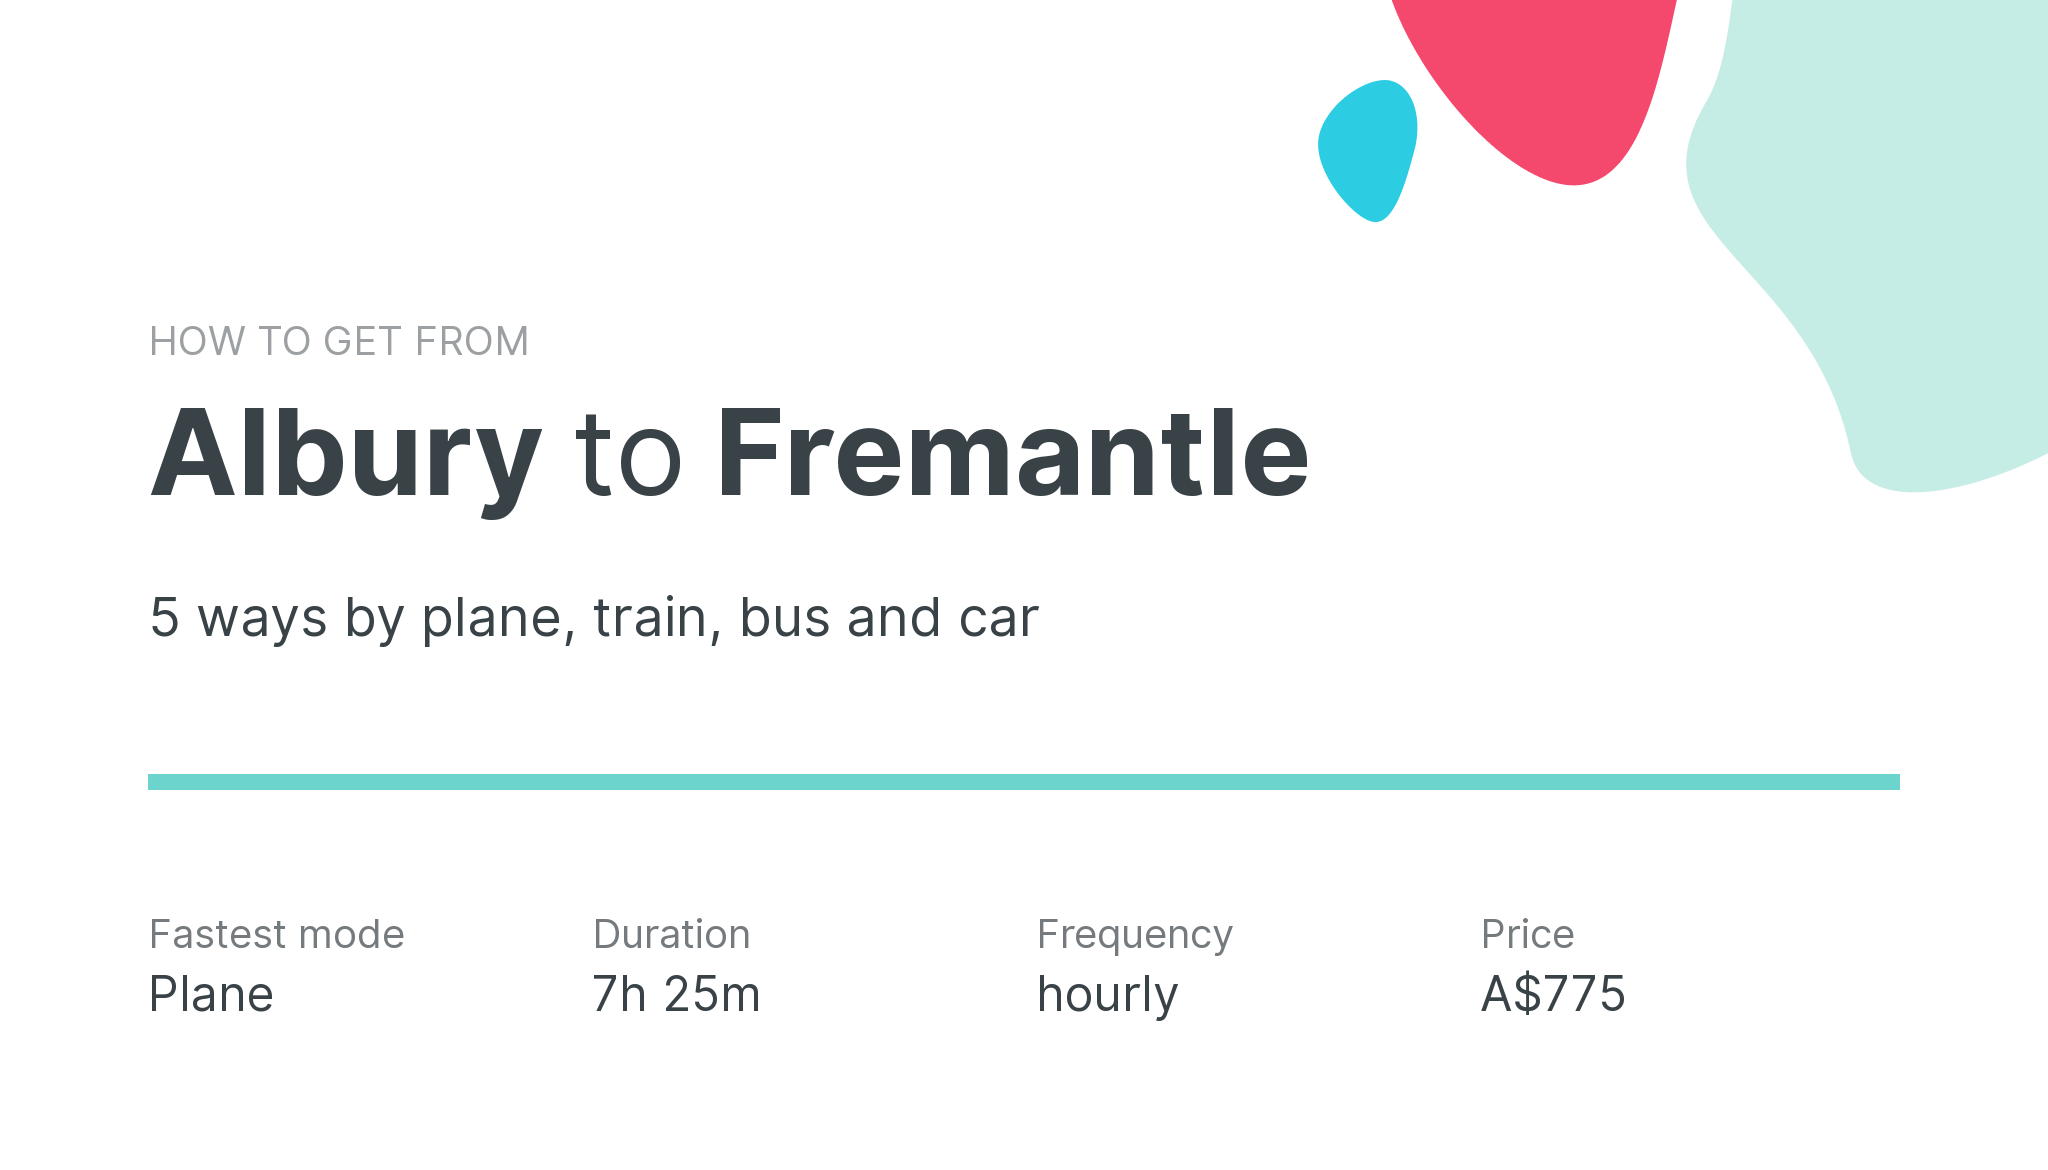 How do I get from Albury to Fremantle